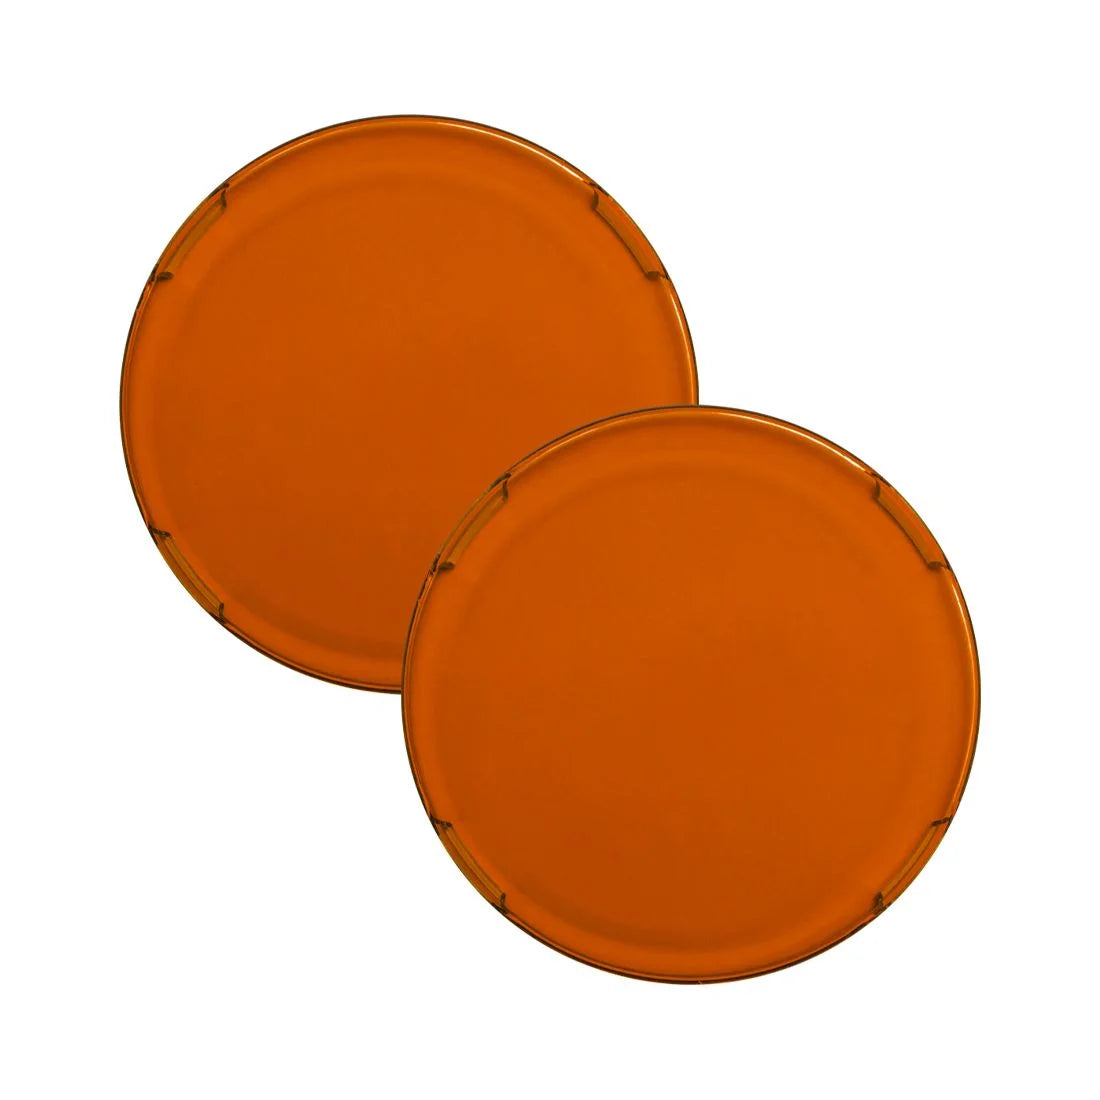 Rigid 360-Series 4" (Round) / Light Covers (Sold in PAIRS) 363671, 363672, 363674, 363675